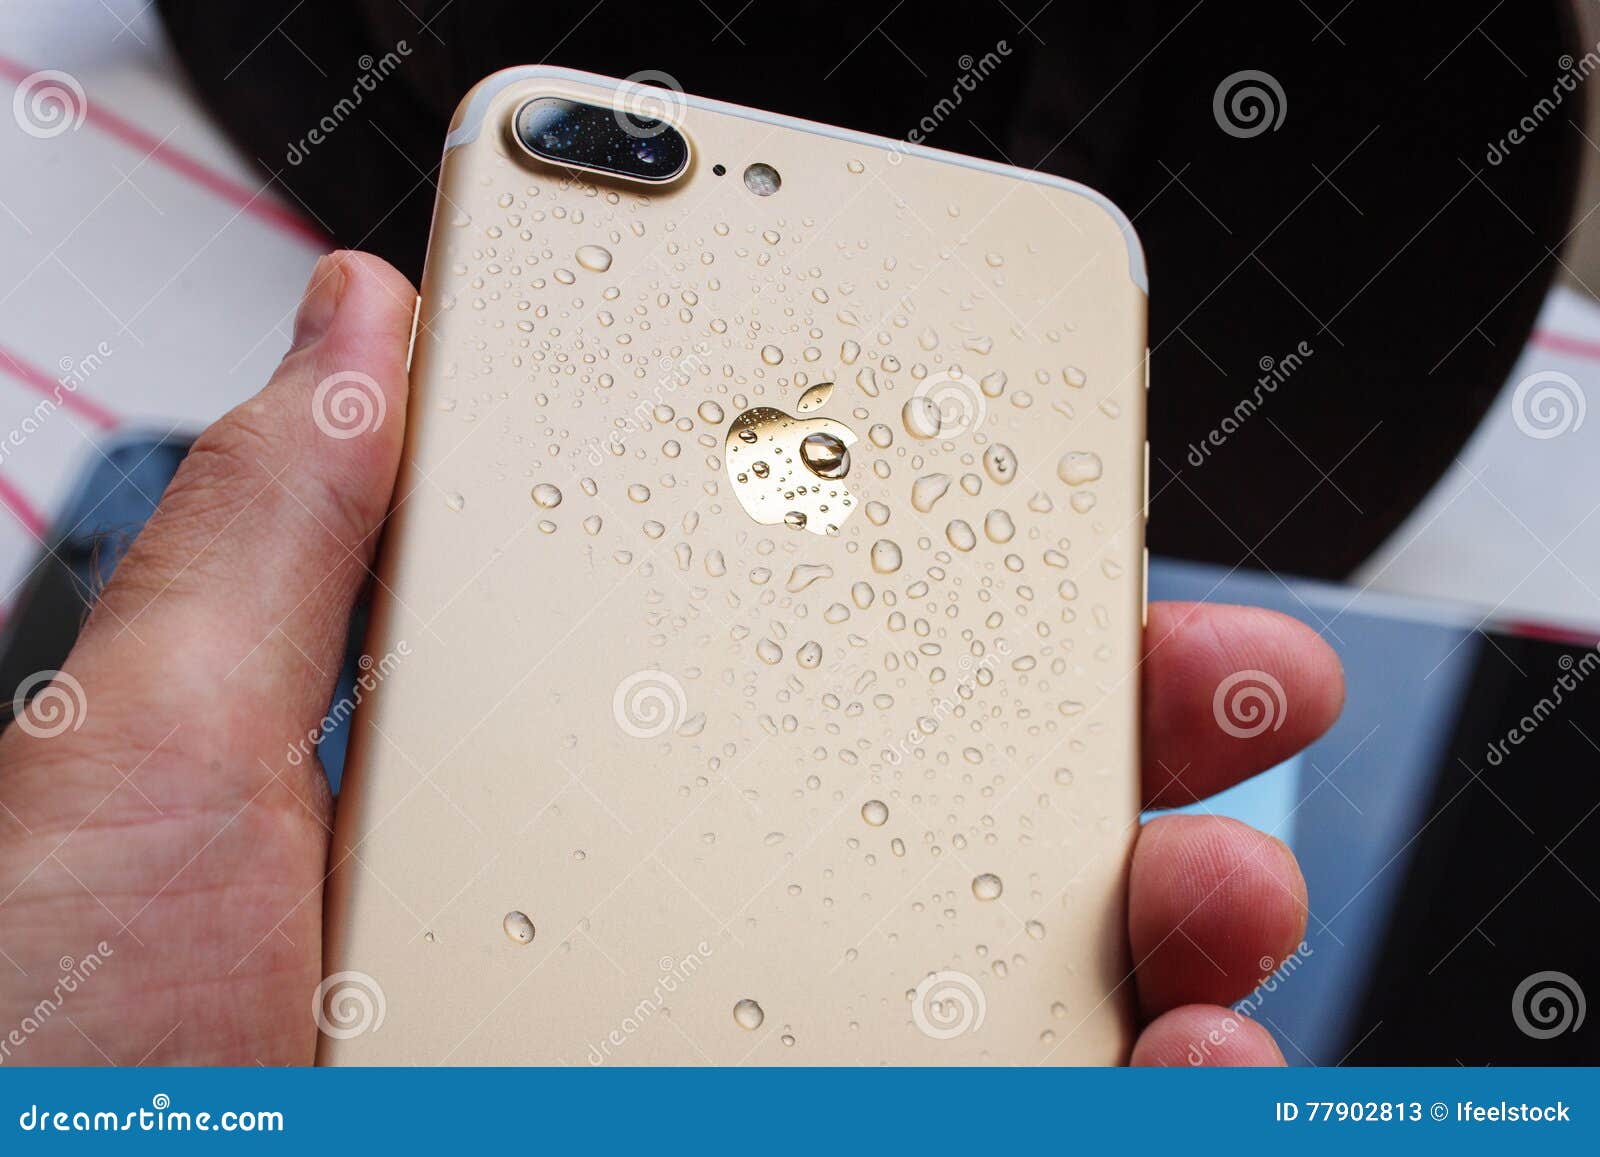 Iphone 7 Plus Waterproof In Man Hand Covered With Drops Editorial Stock Photo Image Of Marketing People